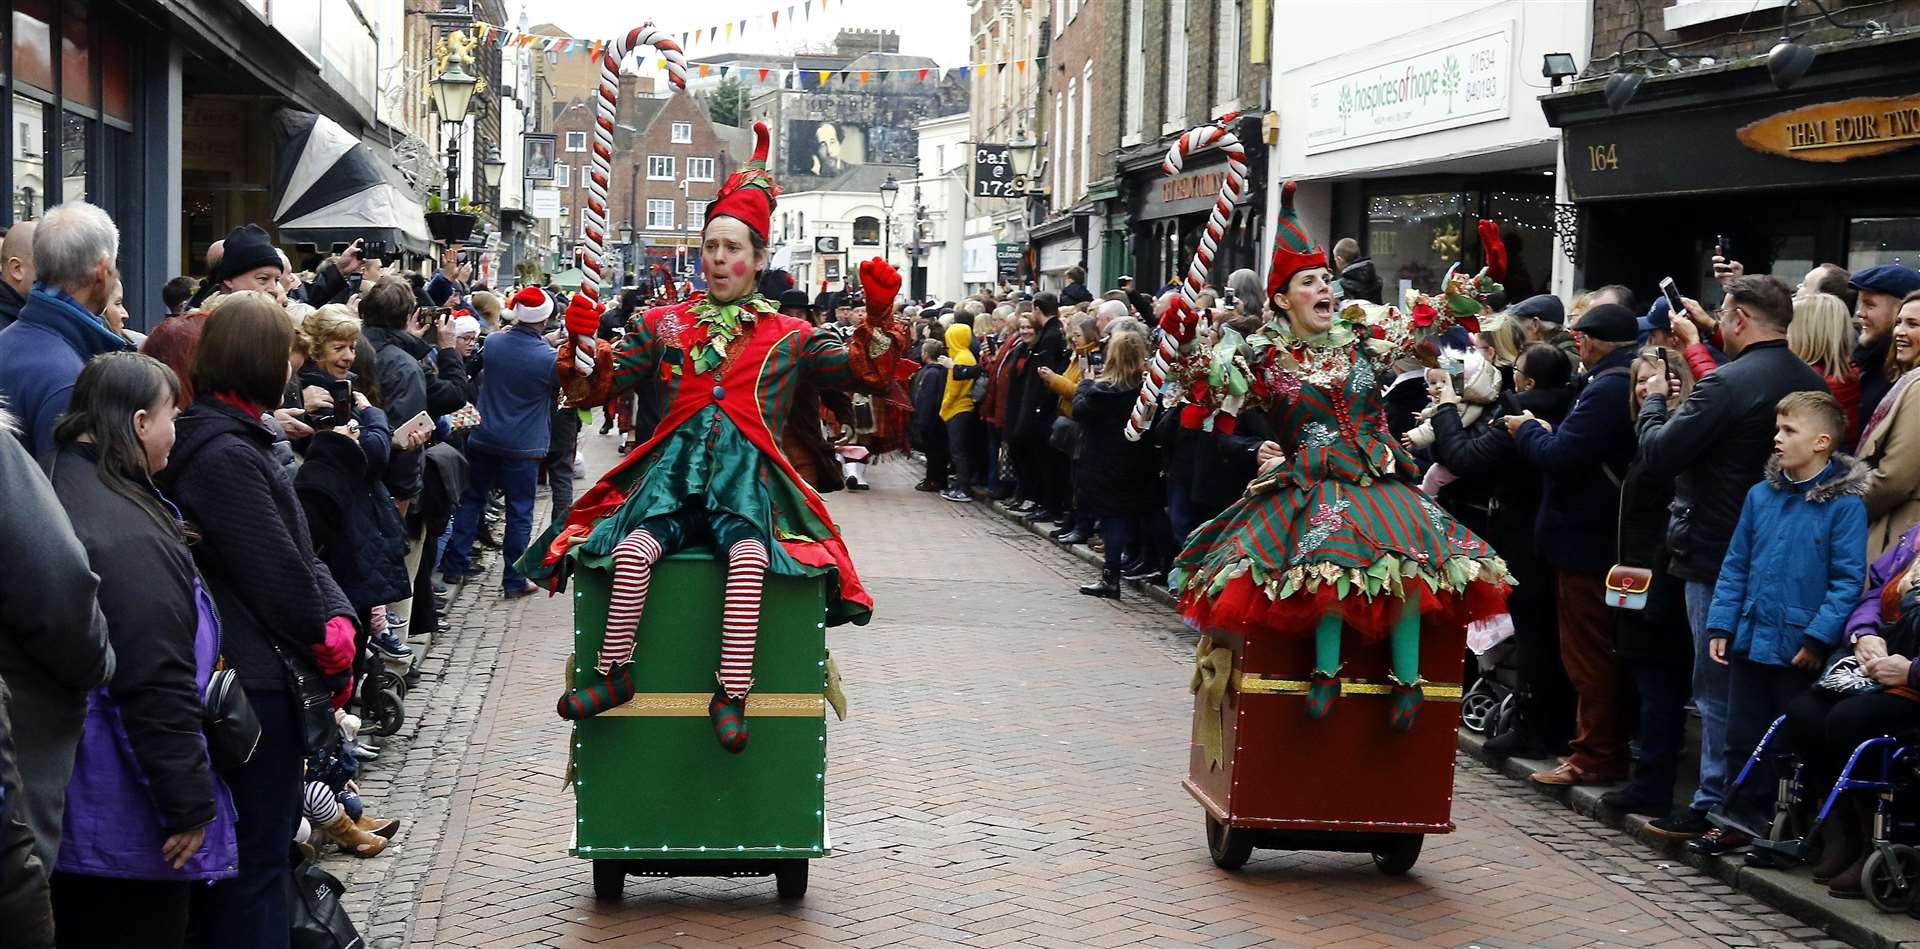 Rochester Christmas Markets and Dickens Christmas Festival dates for